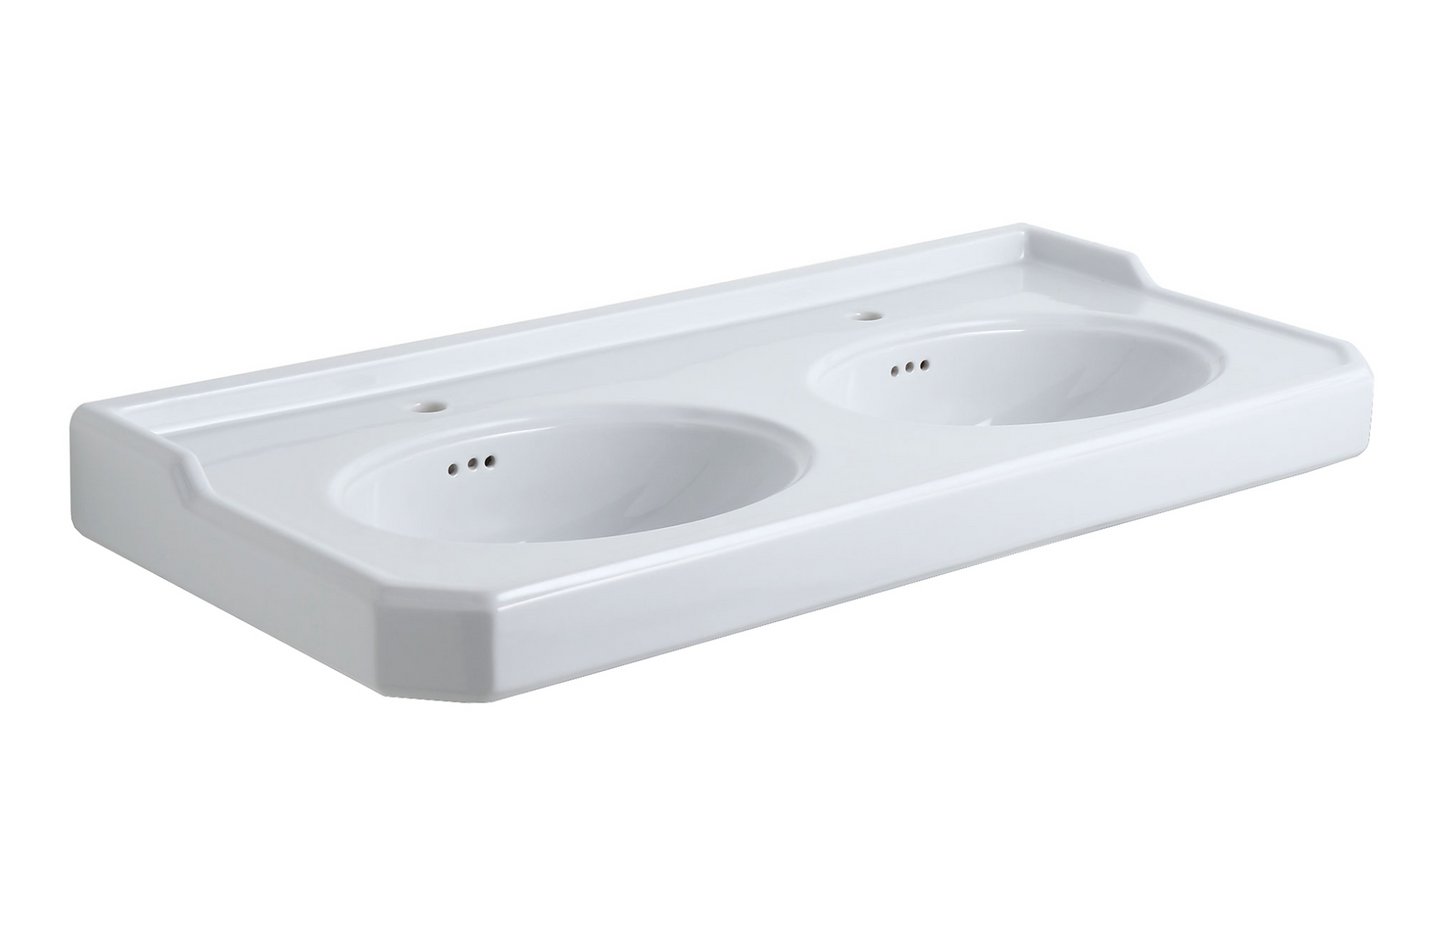 Extra-large double bowl ceramic washbasin with metal legs Provence 700 by Balneo Toscia Classic style